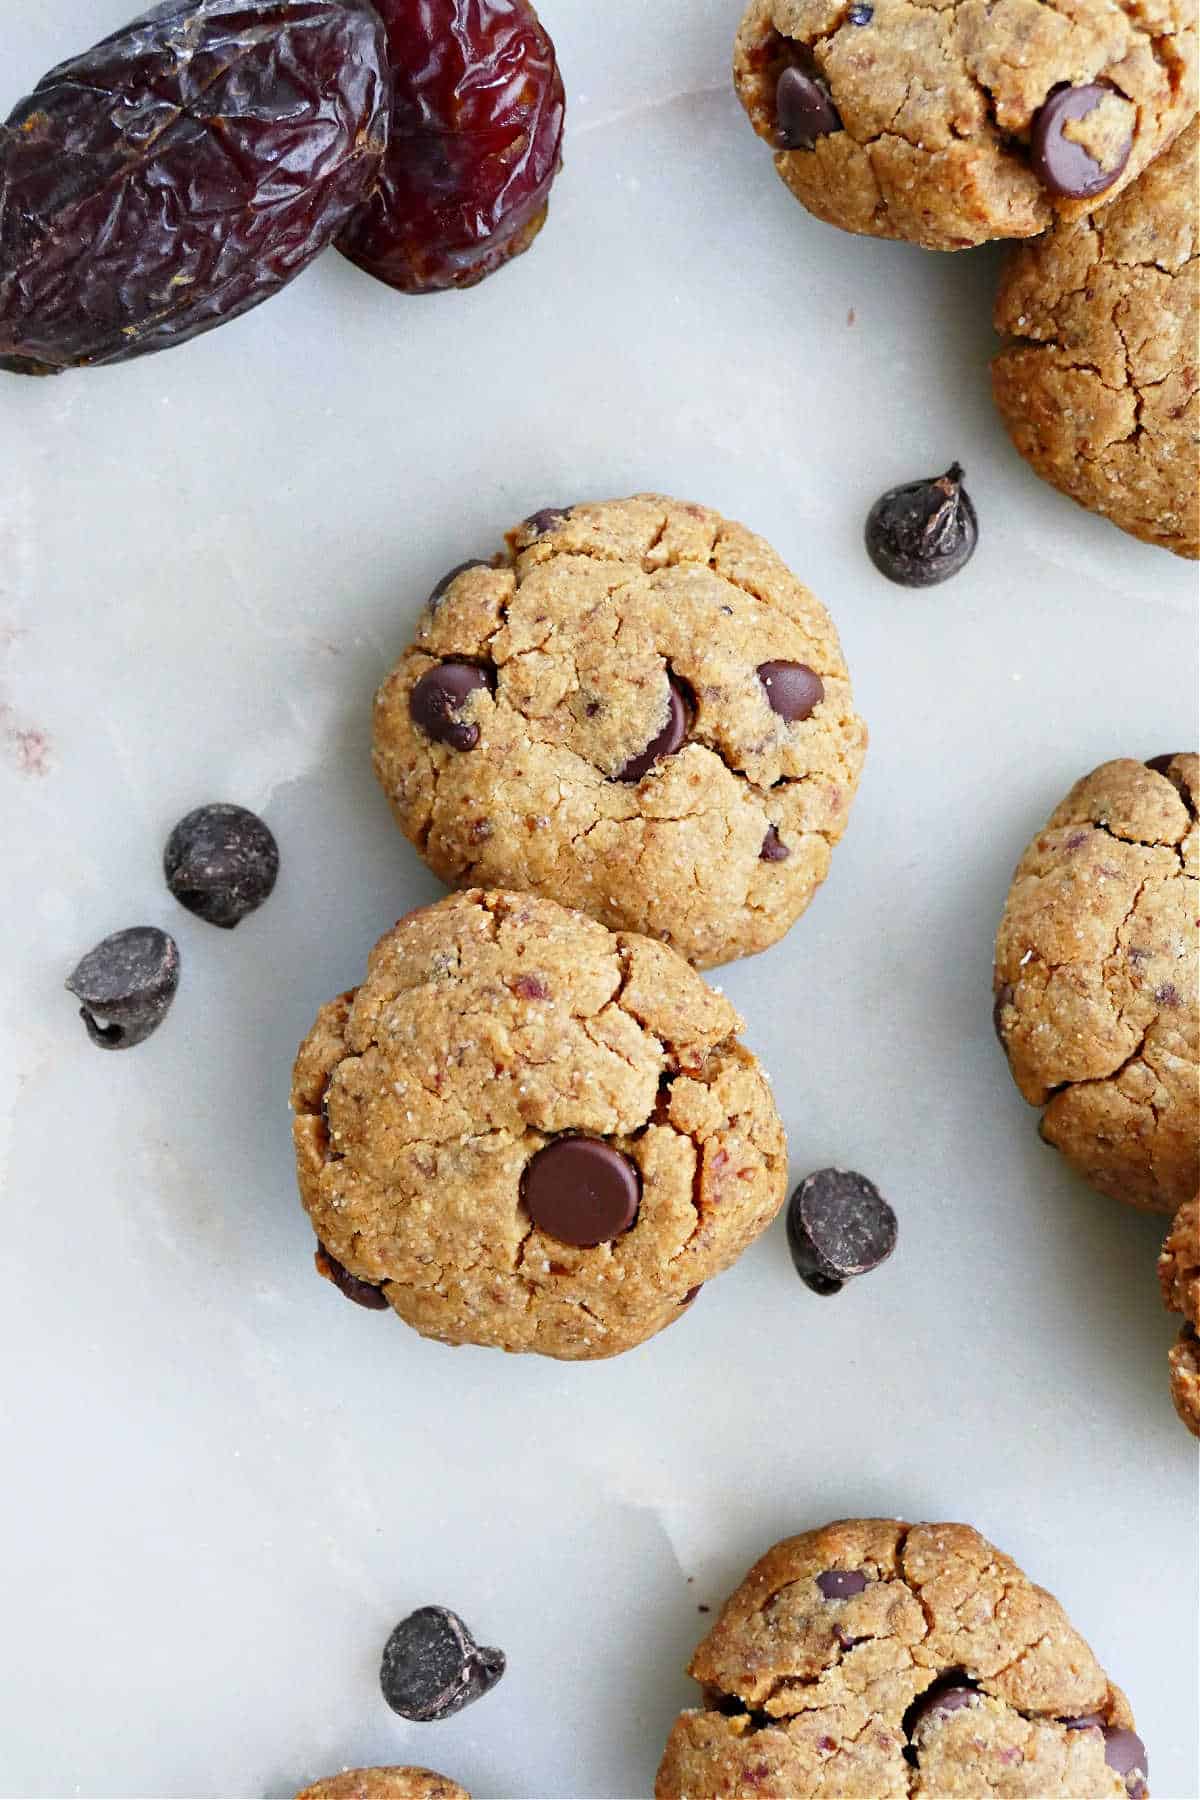 Date sweetened cookies next to whole dates and a few chocolate chips.